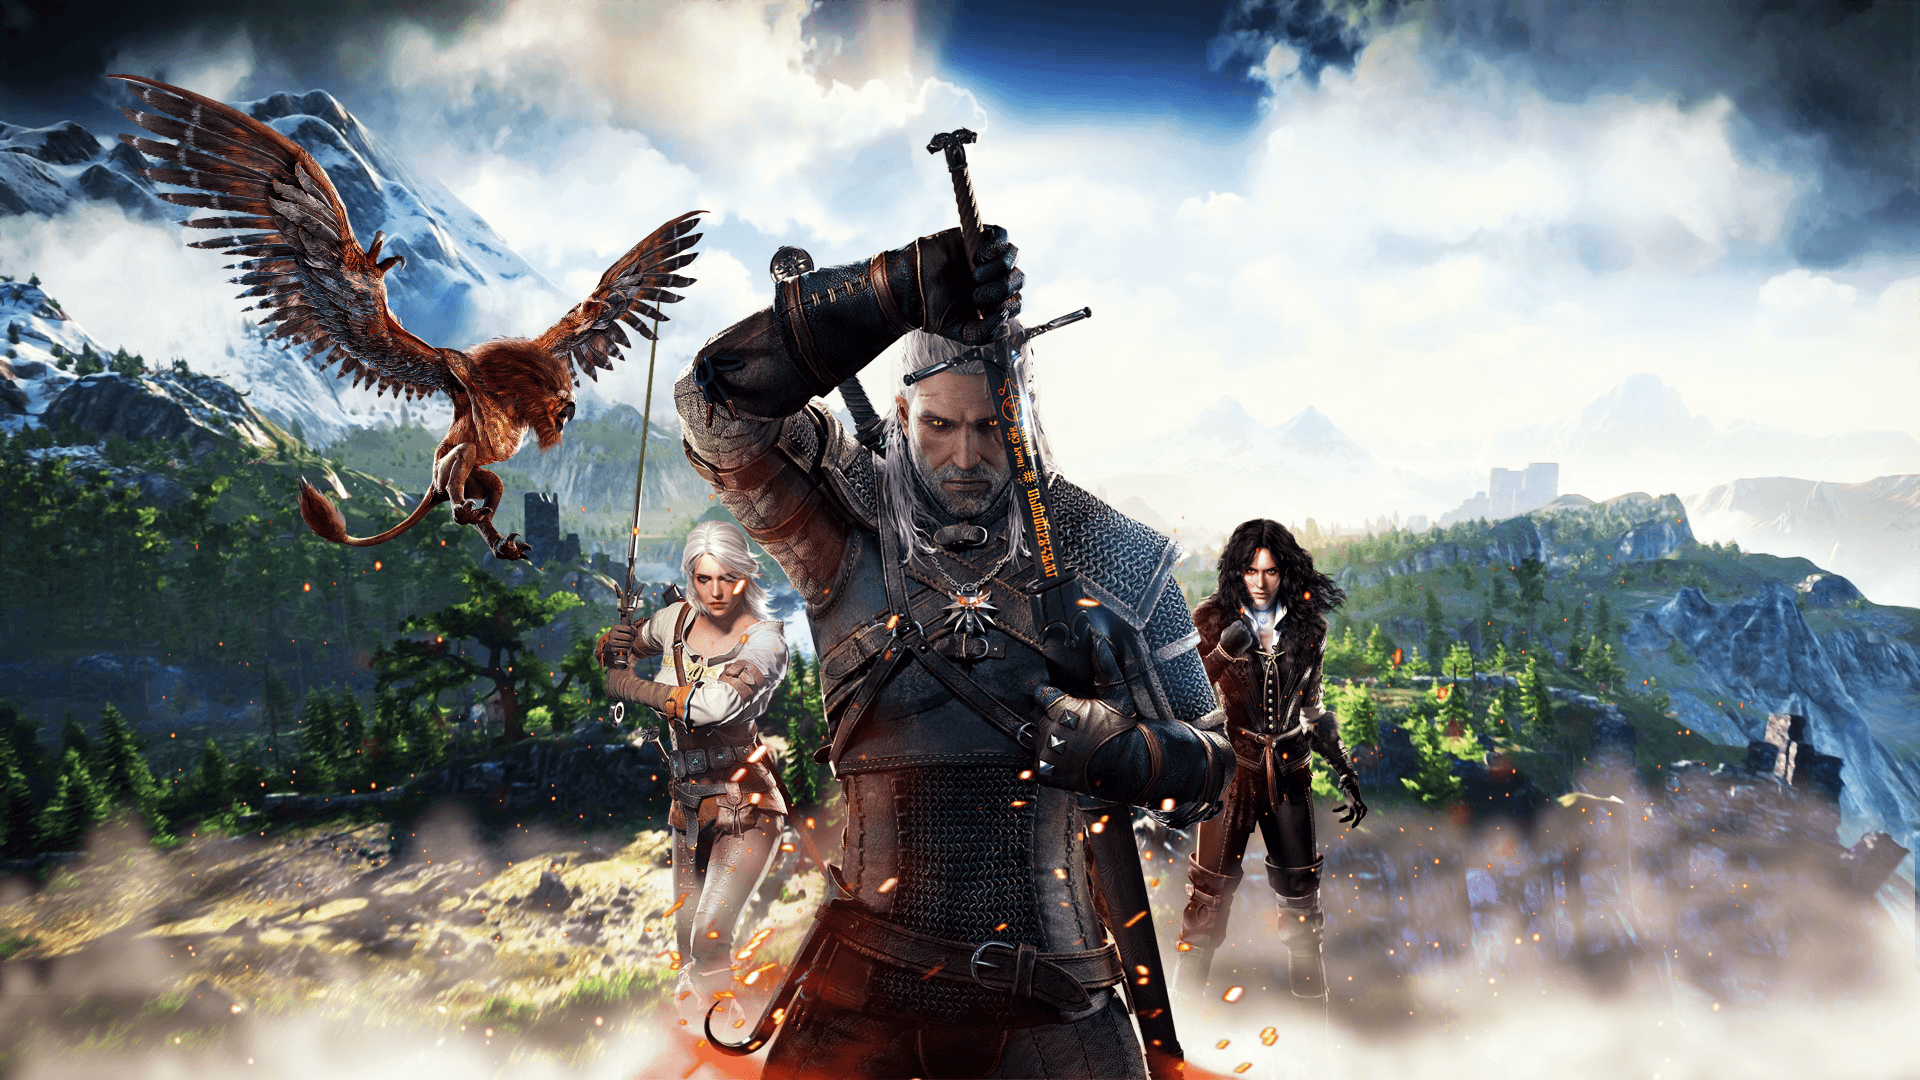 Witcher 3 Wallpapers - Top Free Witcher 3 Backgrounds ...